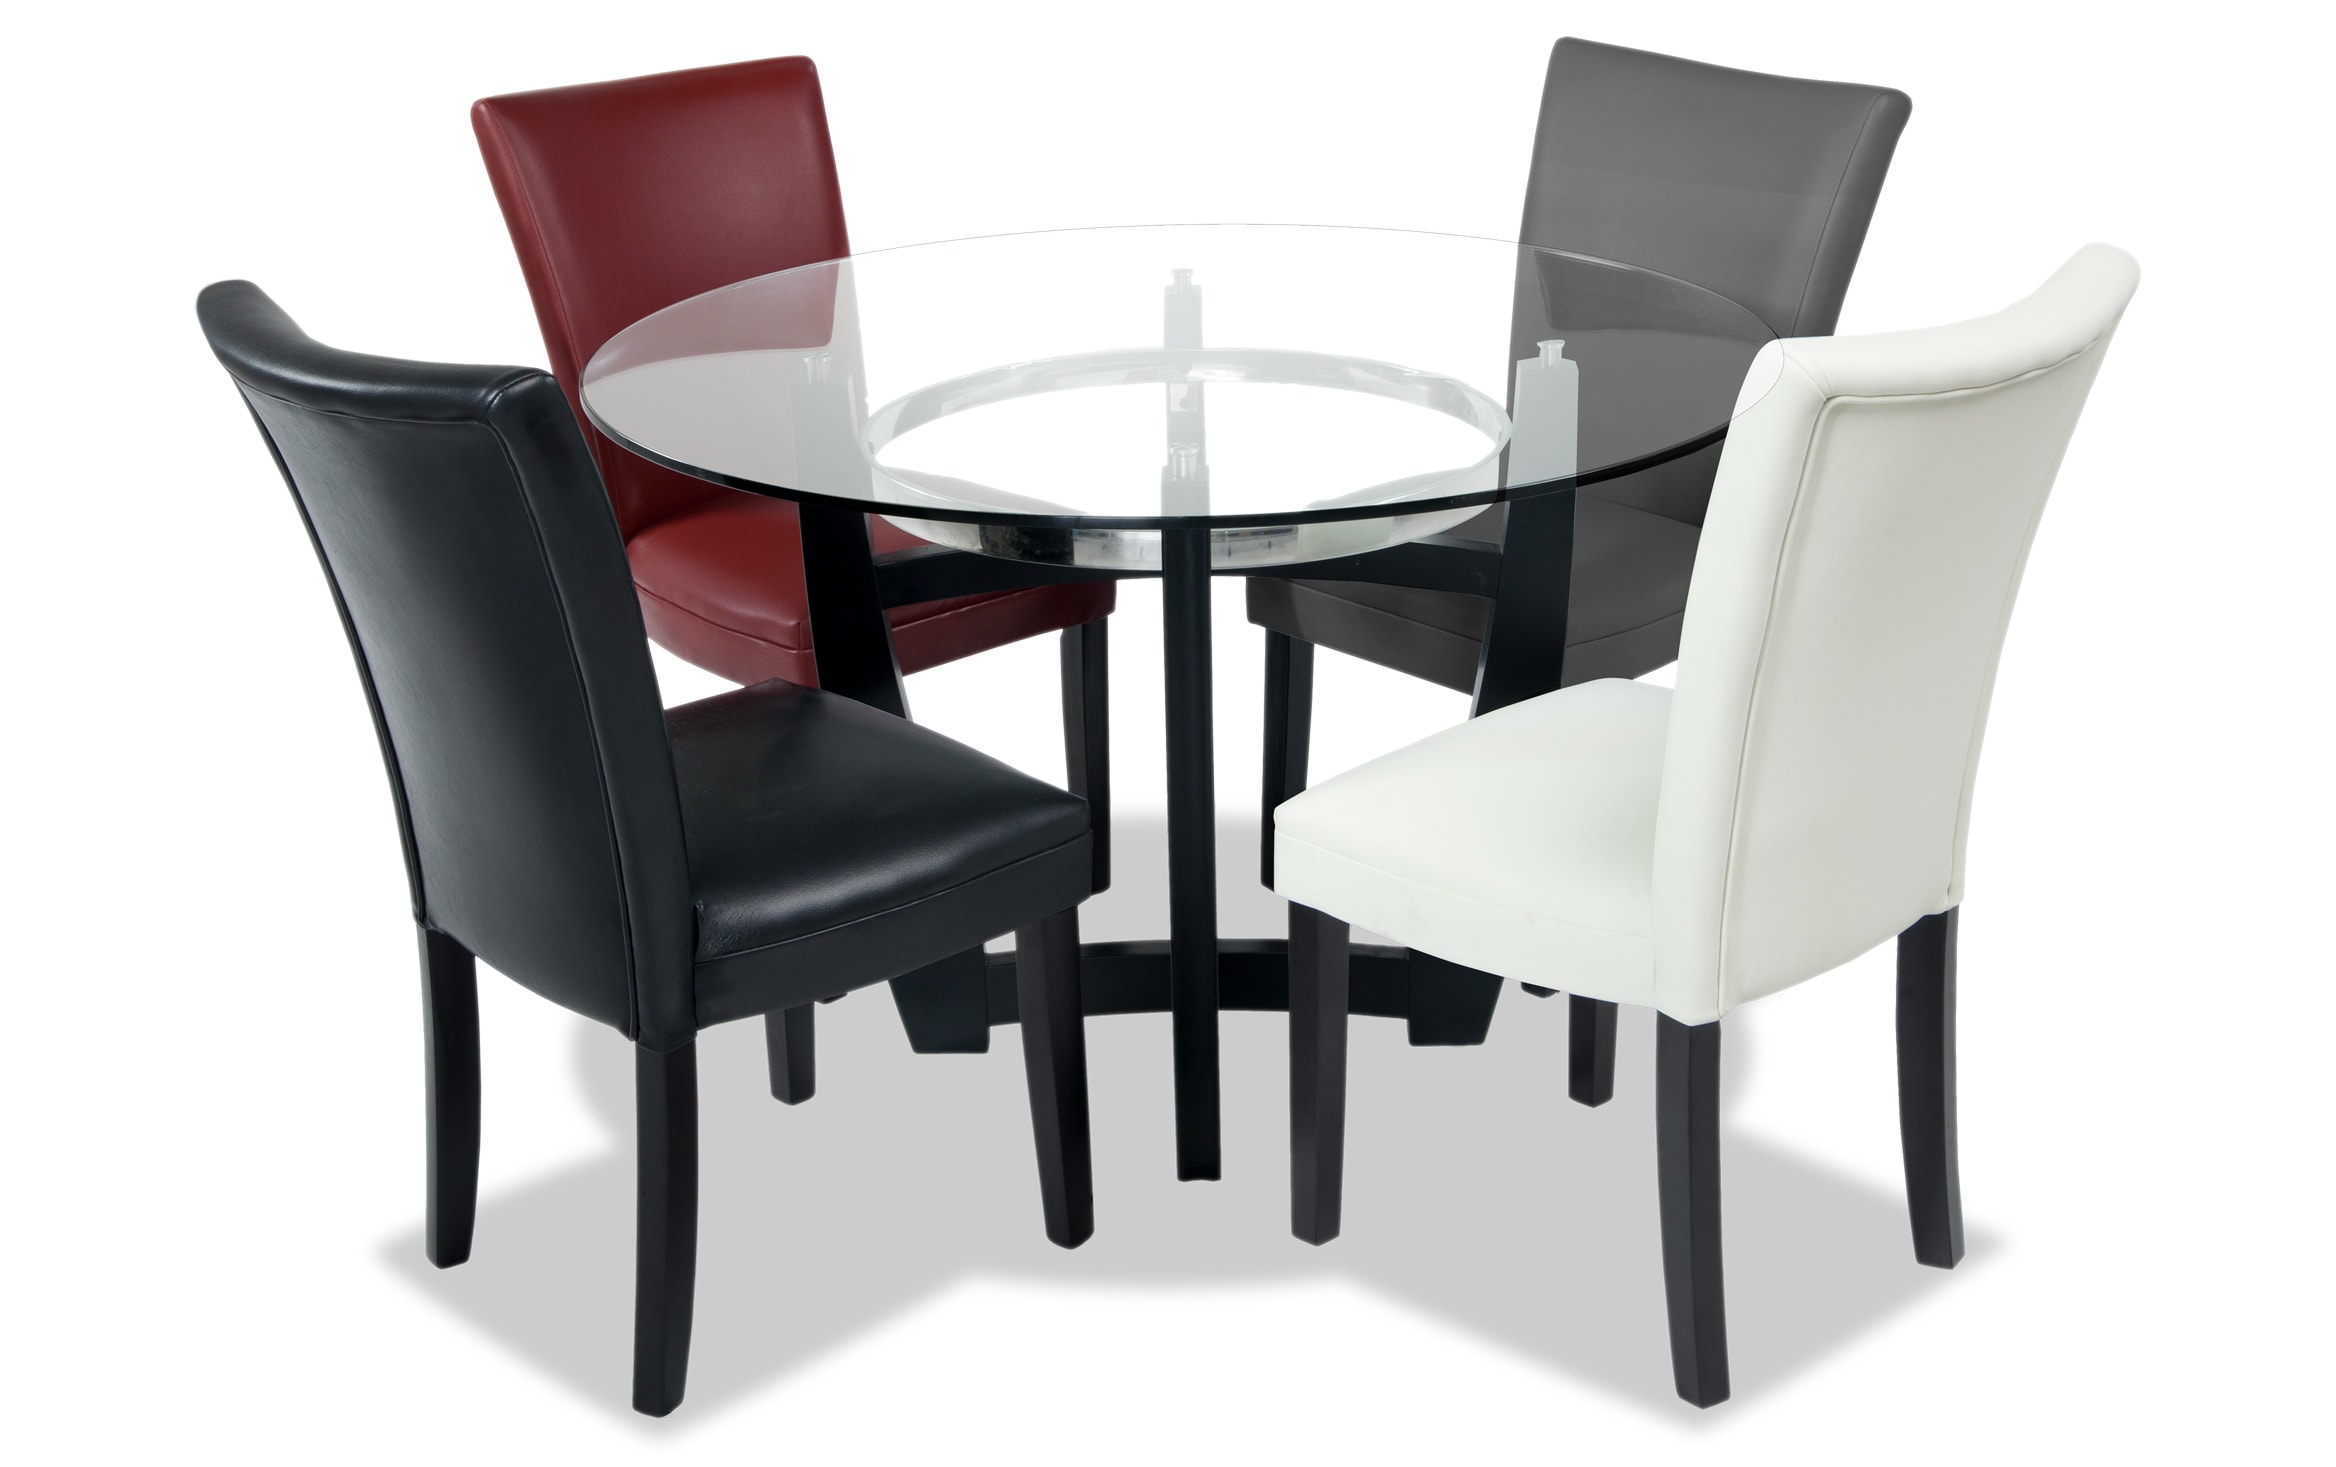 Matinee Multicolored Dining 5 Piece Set Outlet Bobs Com